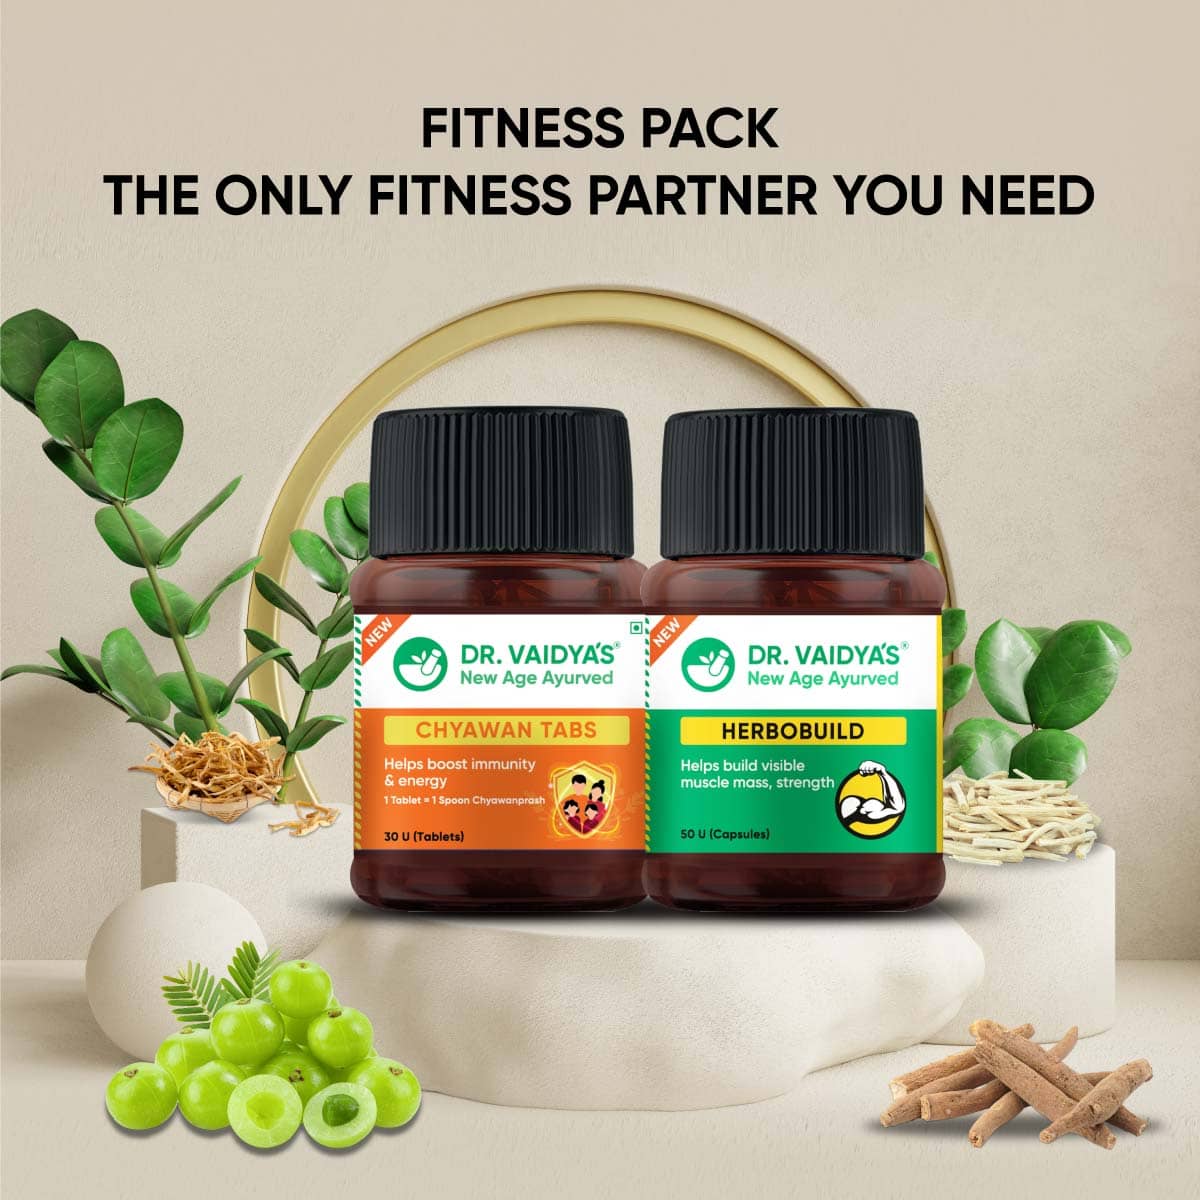 Fitness Pack: For Helping You Achieve Your Fitness Goals